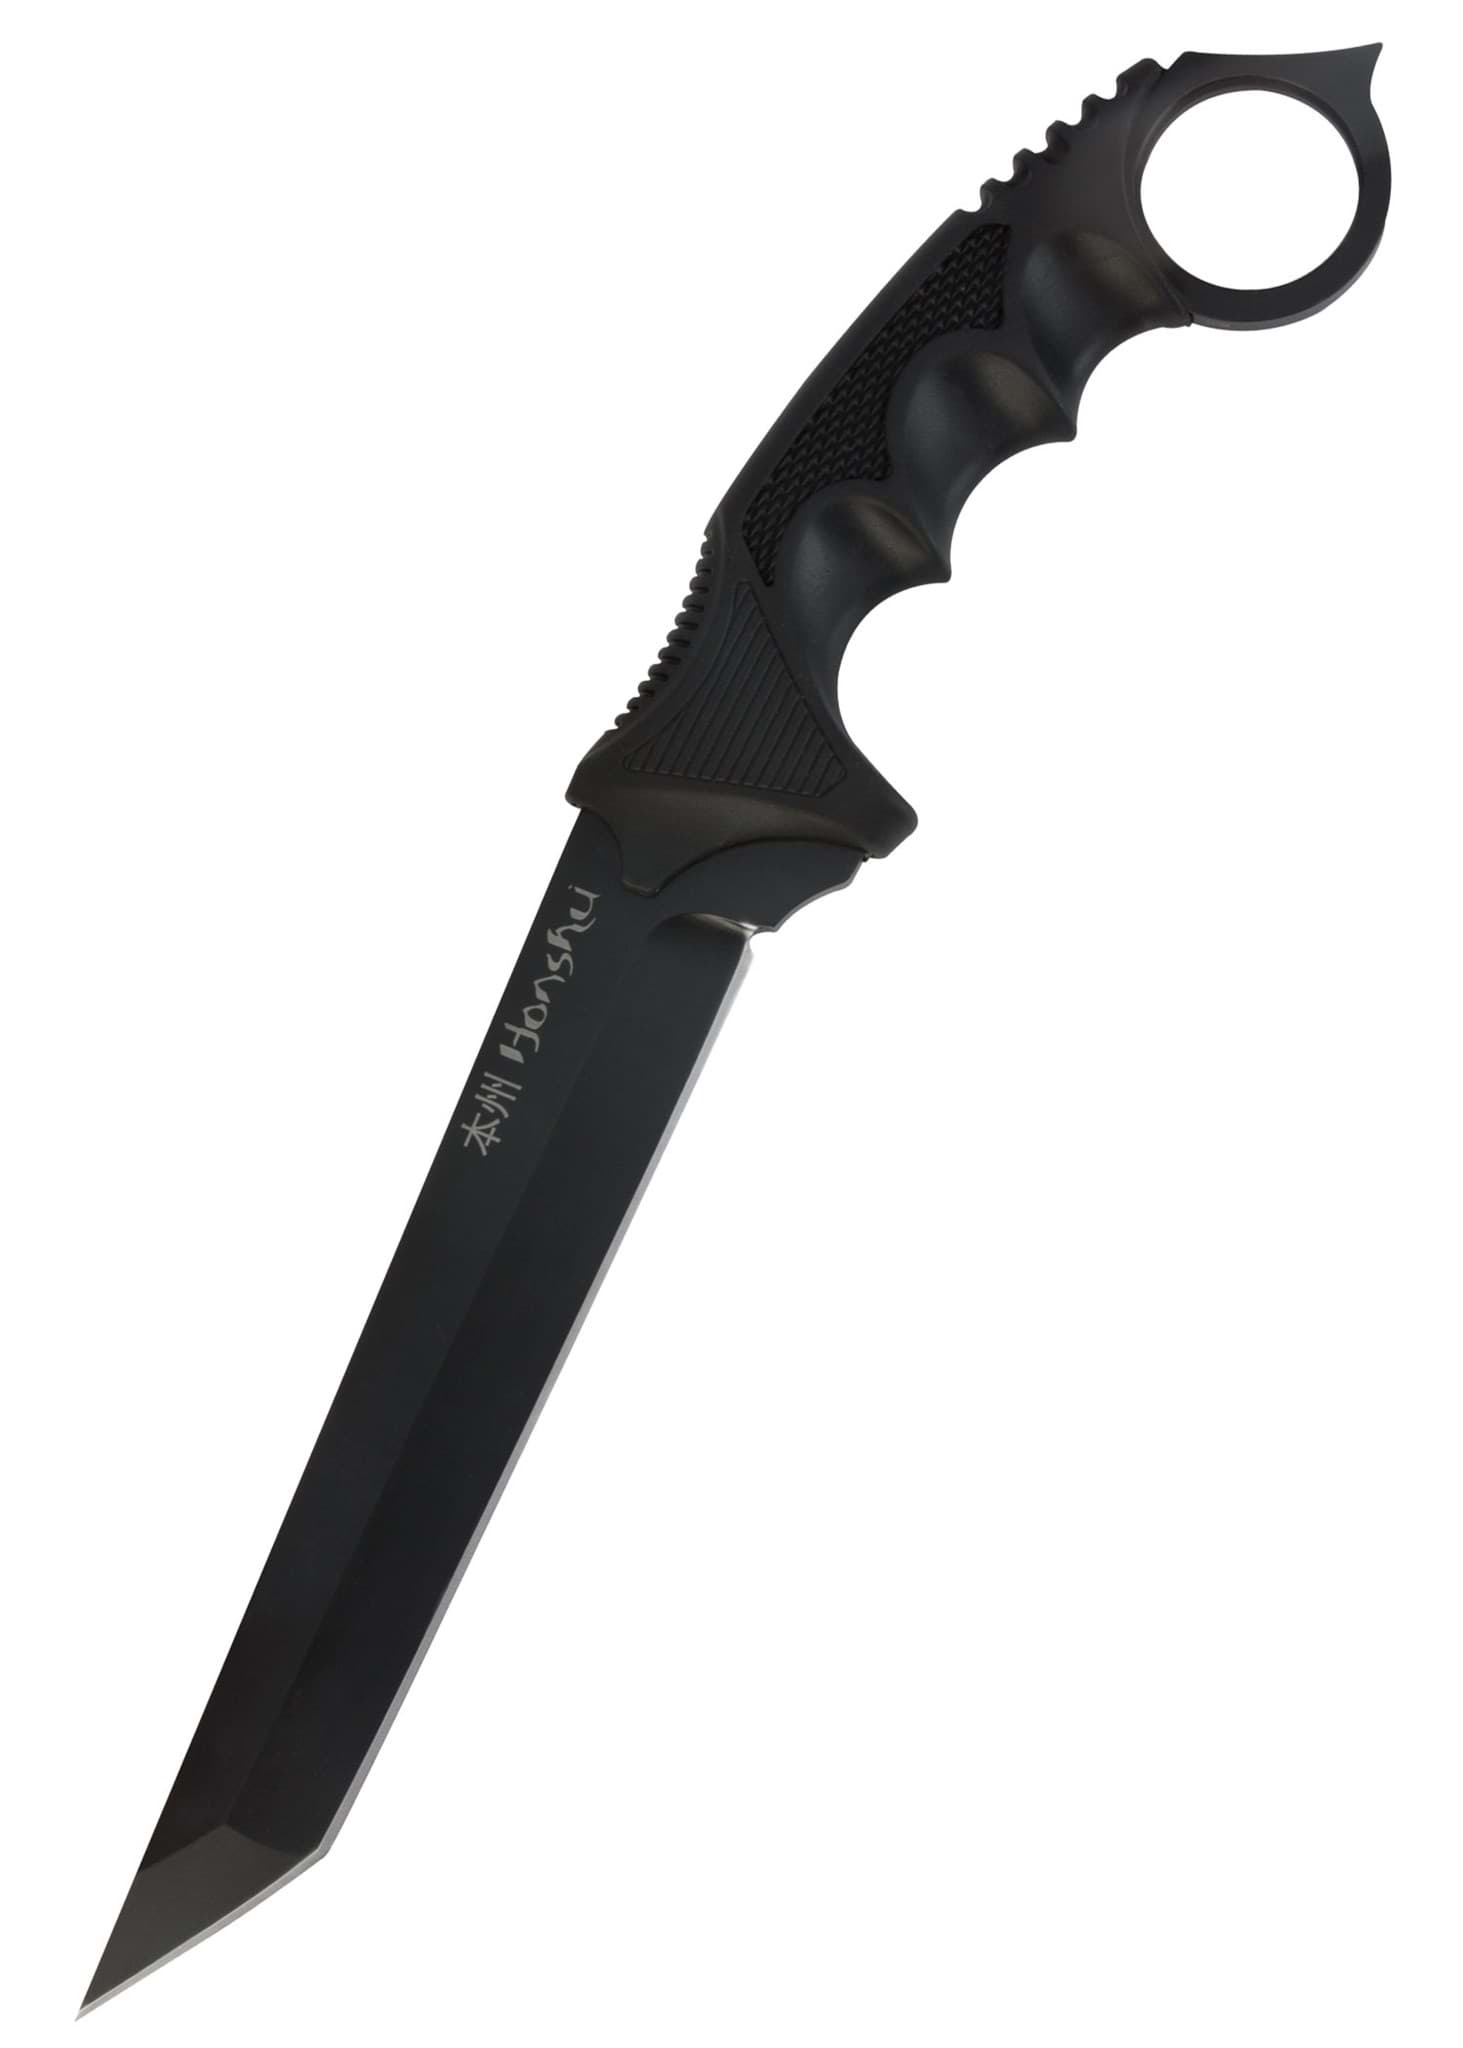 Image de United Cutlery - Honshu Aizu Ring Fighter Tanto